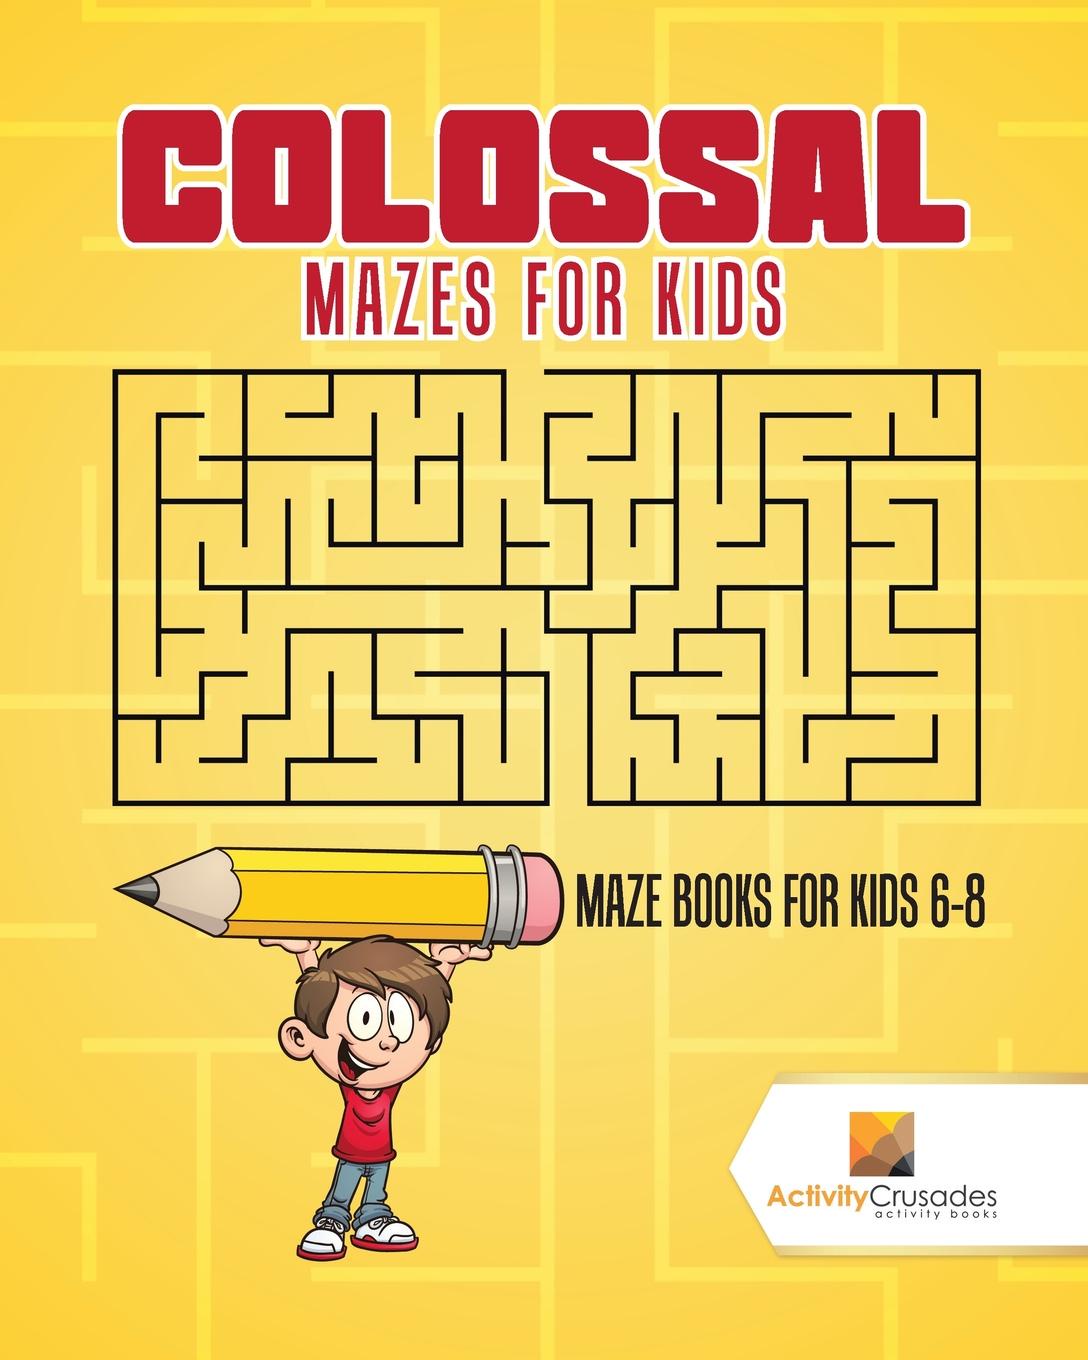 Activity Crusades Colossal Mazes for Kids. Maze Books for Kids 6-8